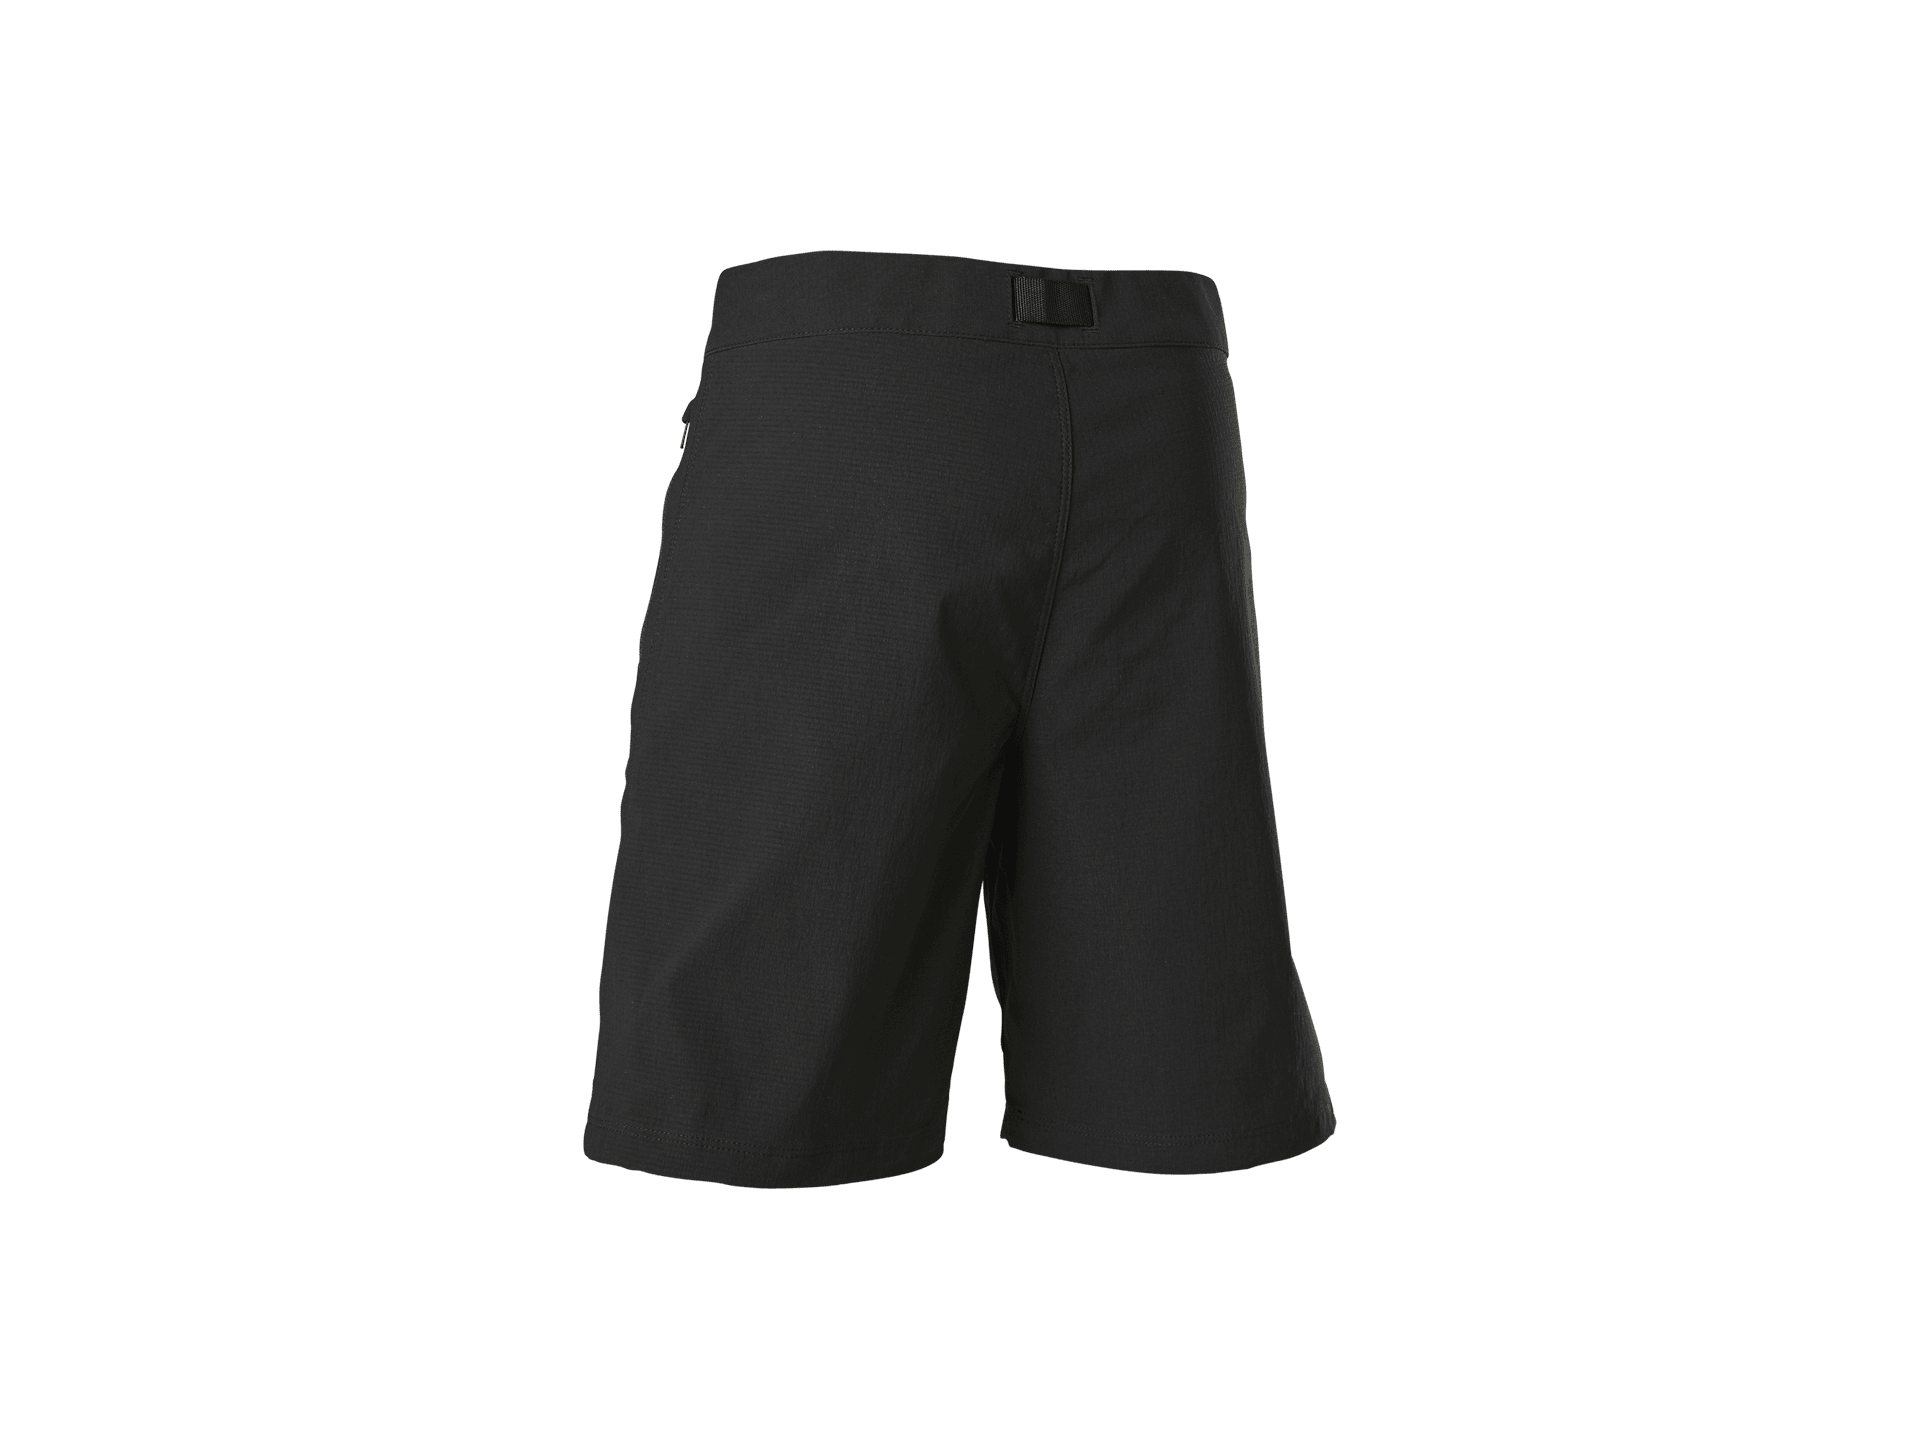 Fox Racing Ranger Youth Mountain Bike Short with Liner